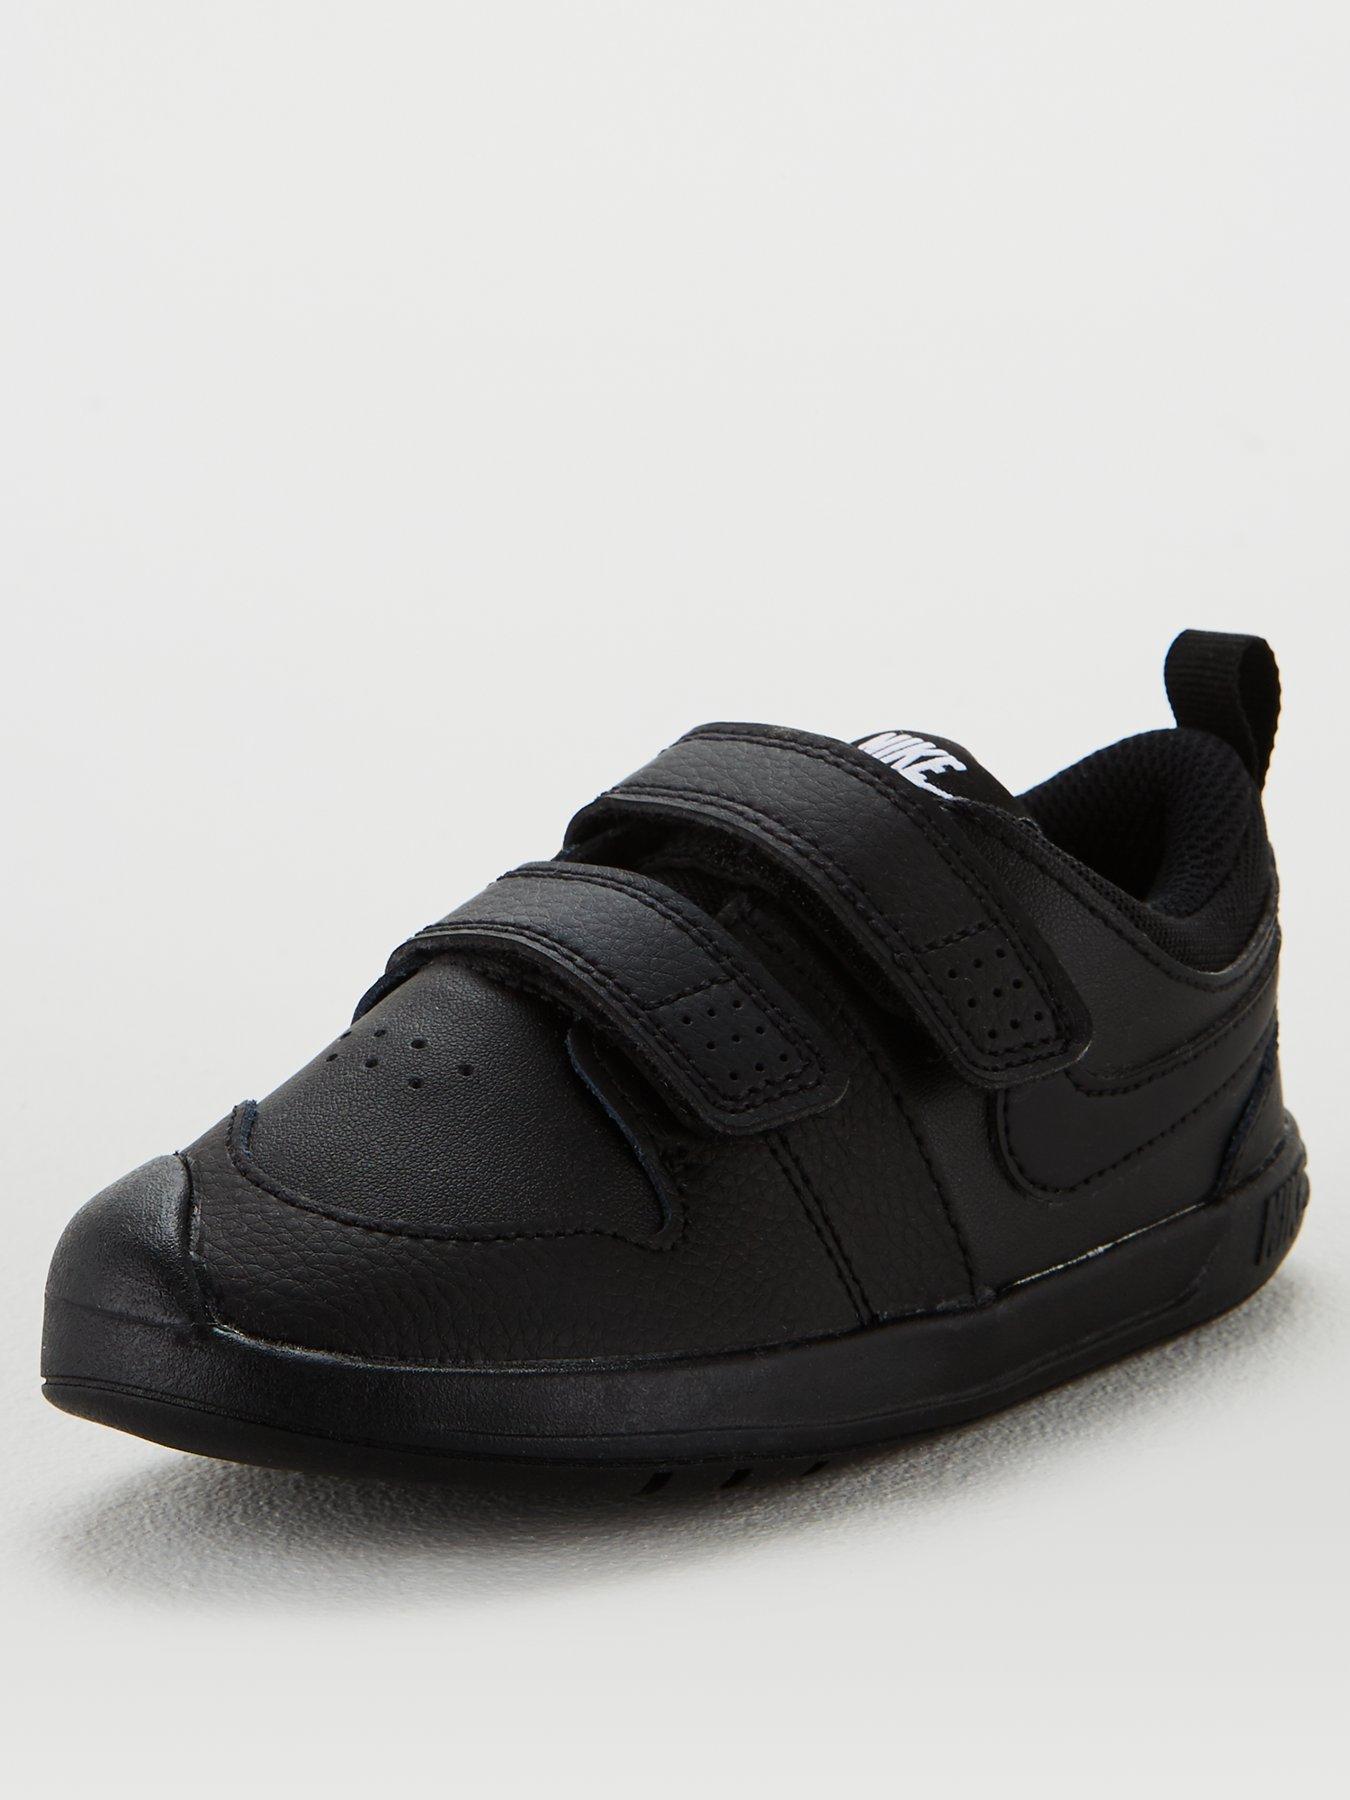 infant size 9.5 trainers